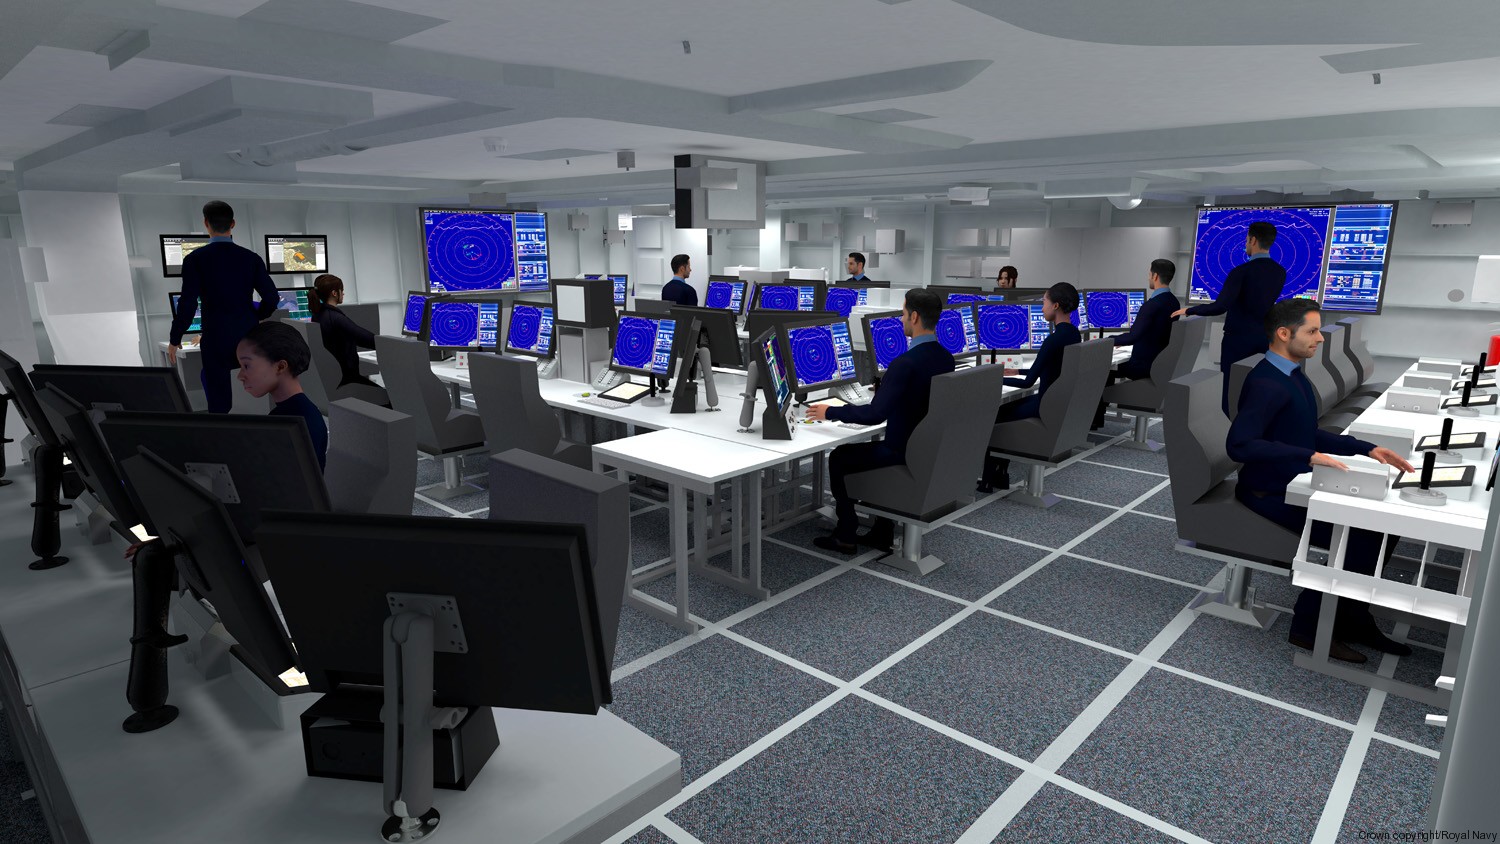 type 26 city class multi-mission frigate ffg global combat ship royal navy 06 operations room cic